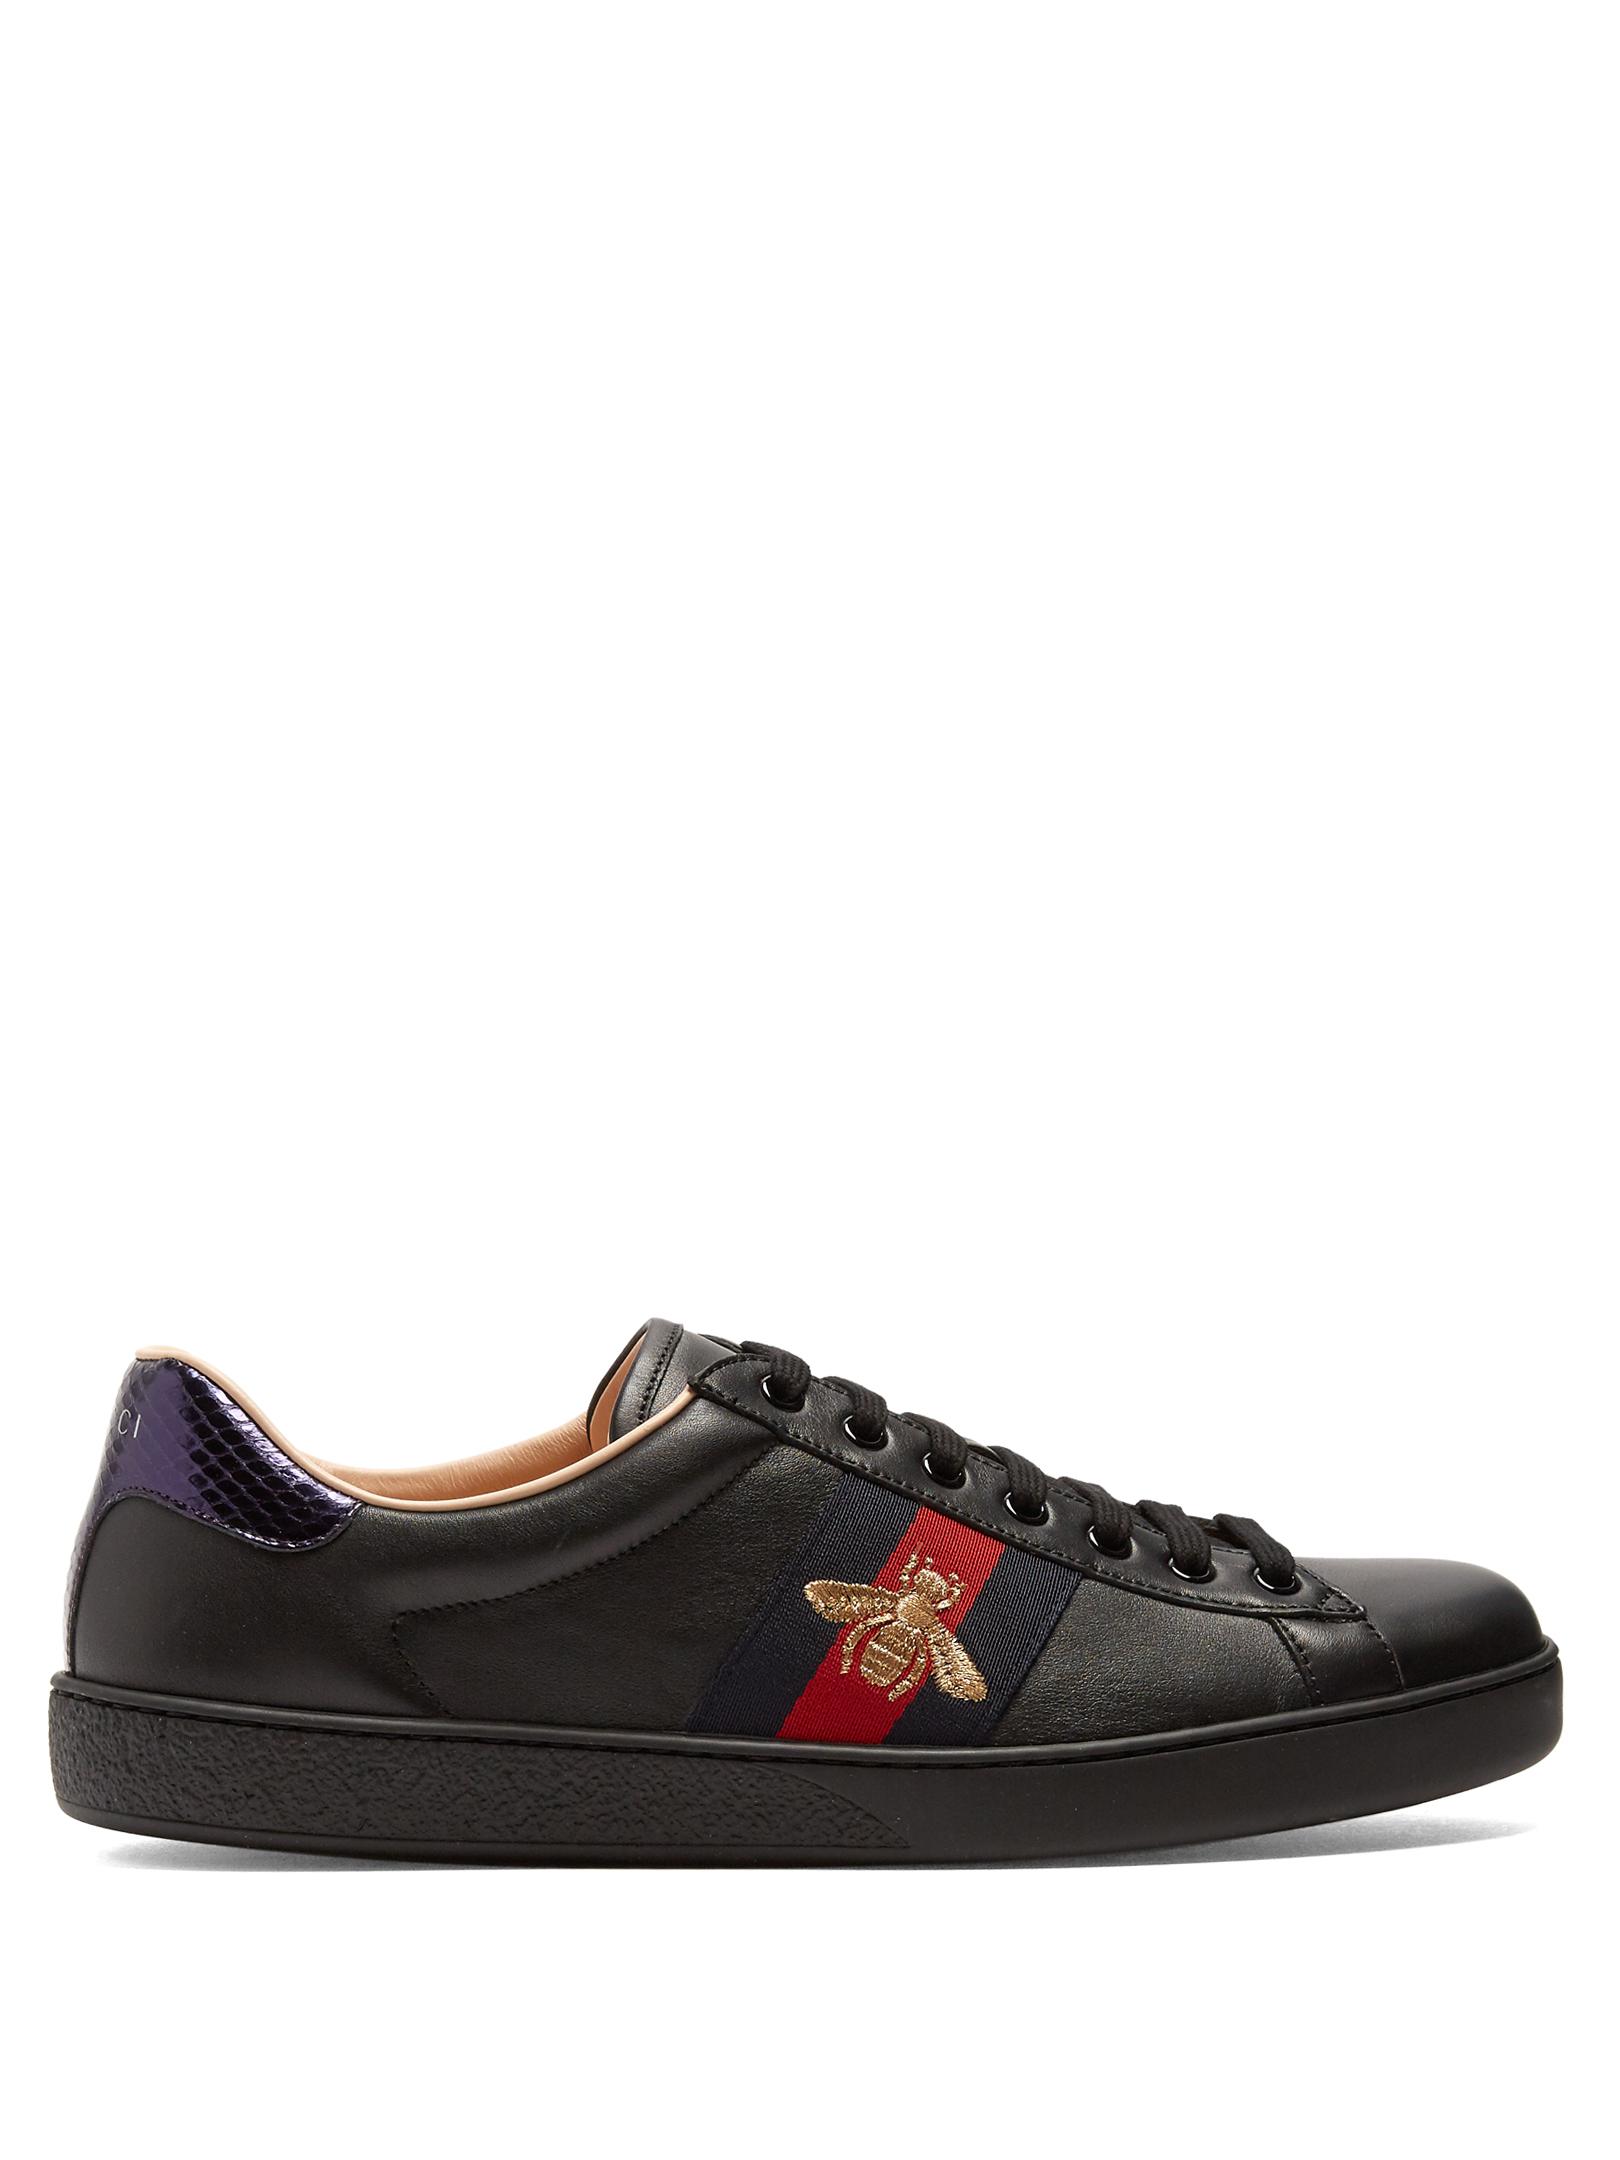 Gucci Leather Ace Bee Sneakers in Black 